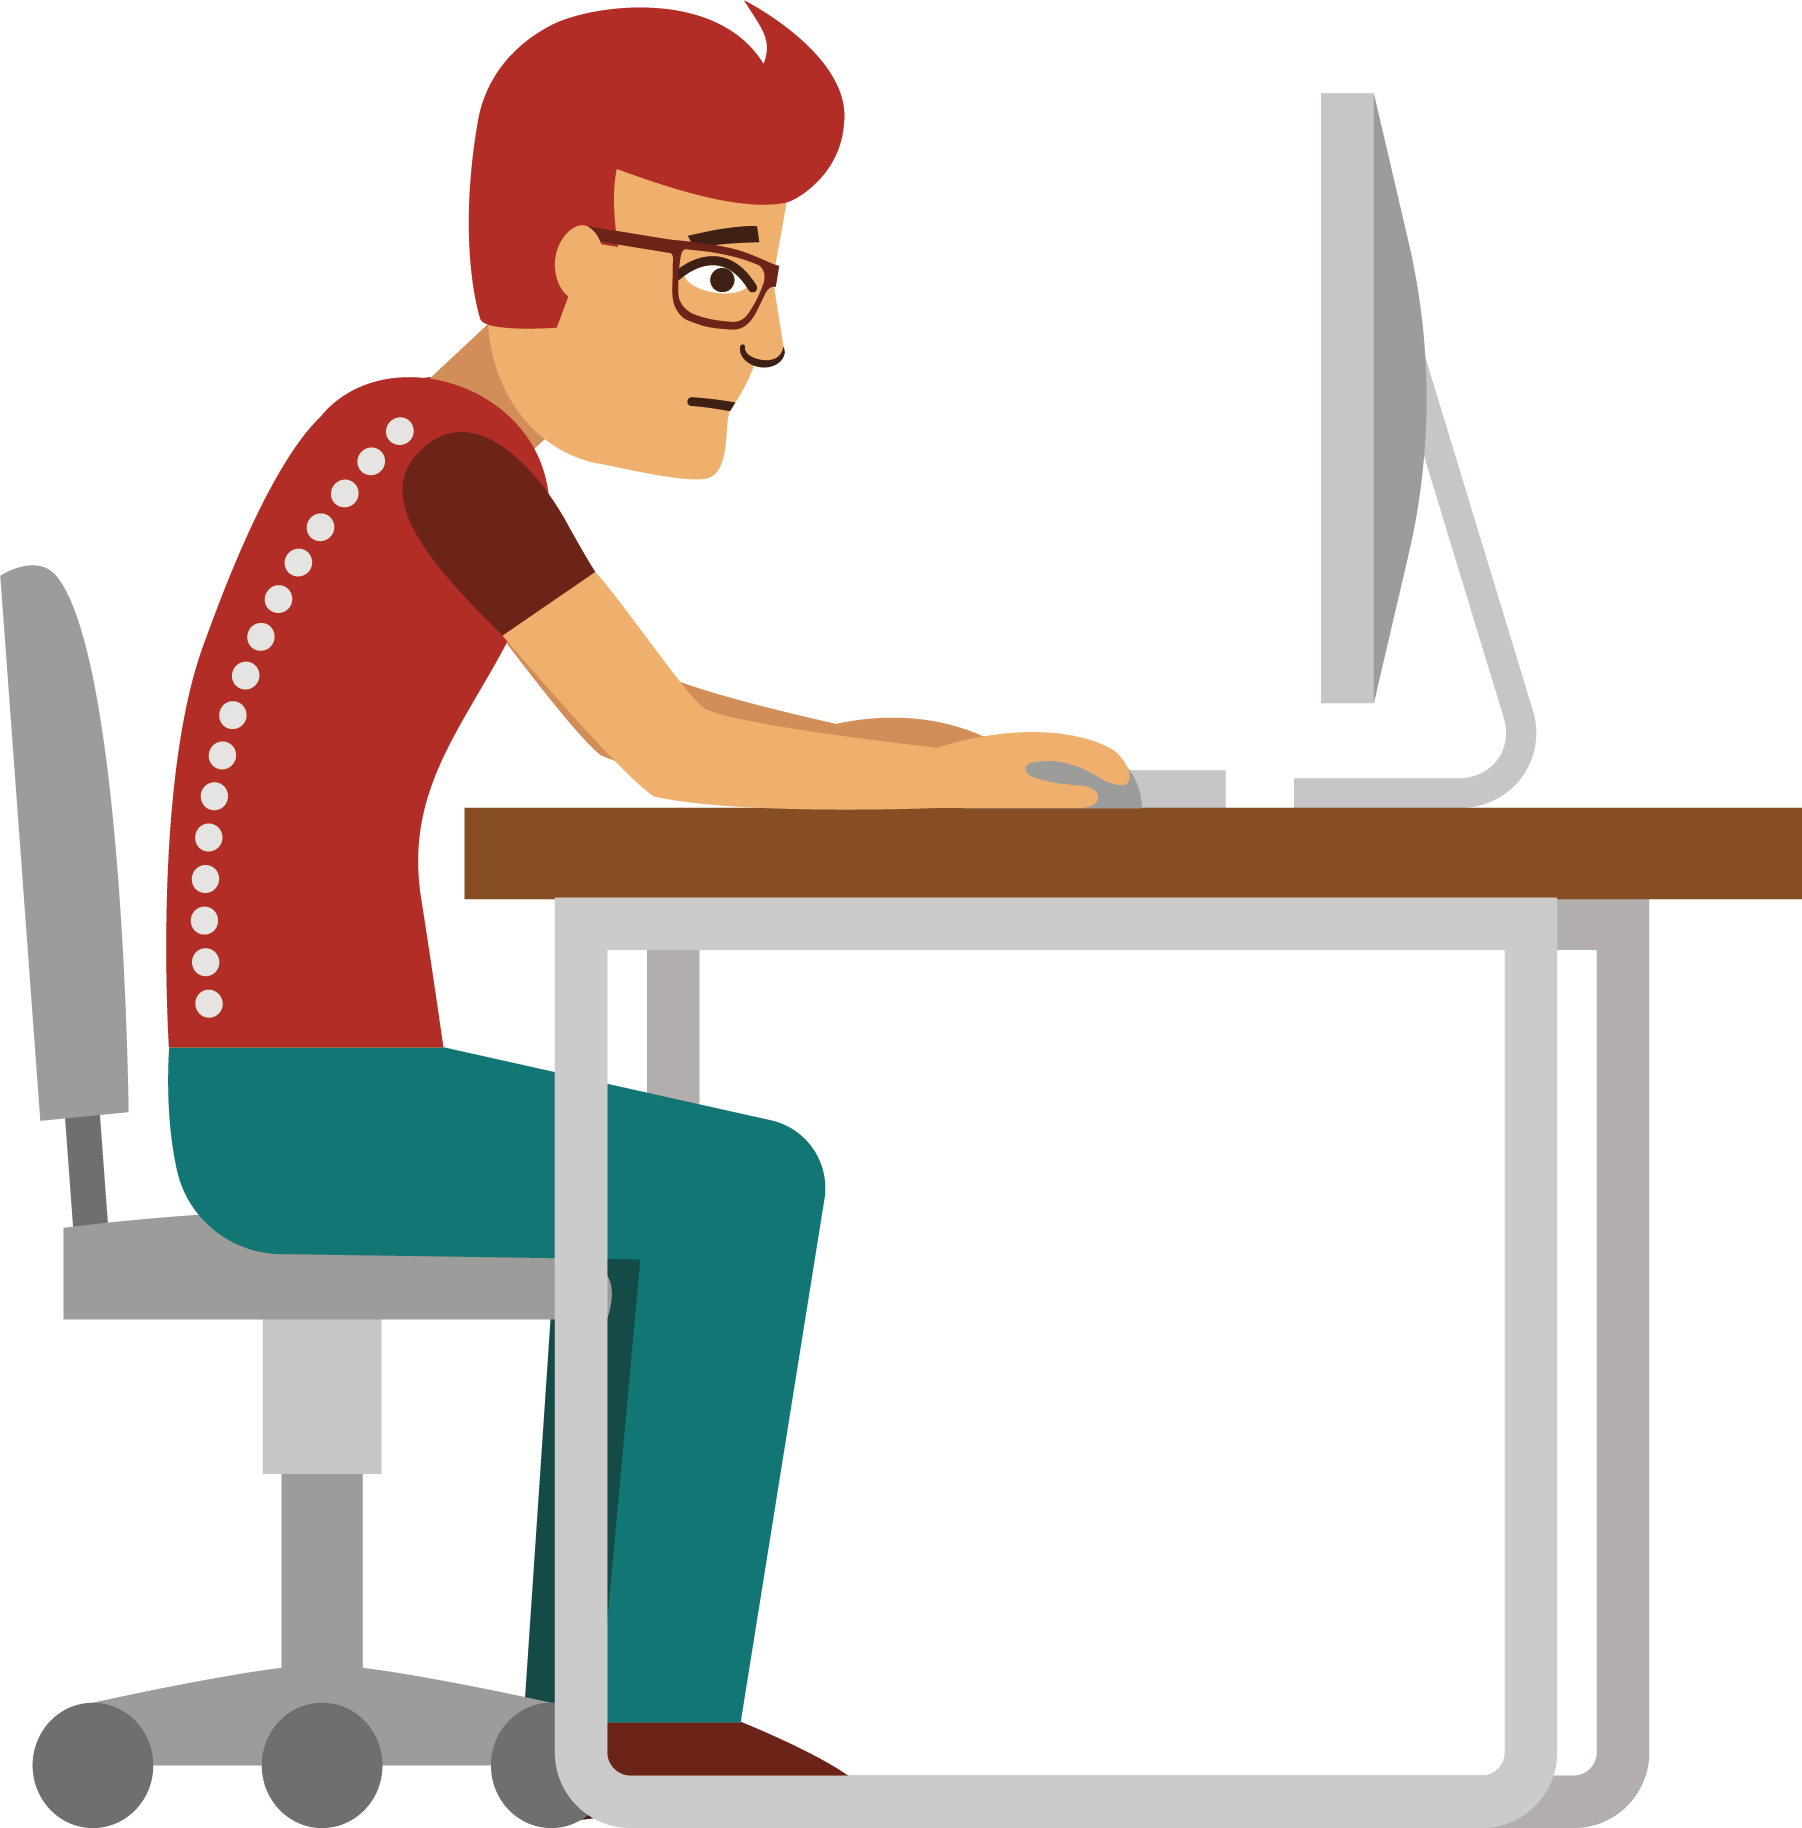 Infographic syndrome illustration people. Humans clipart office person